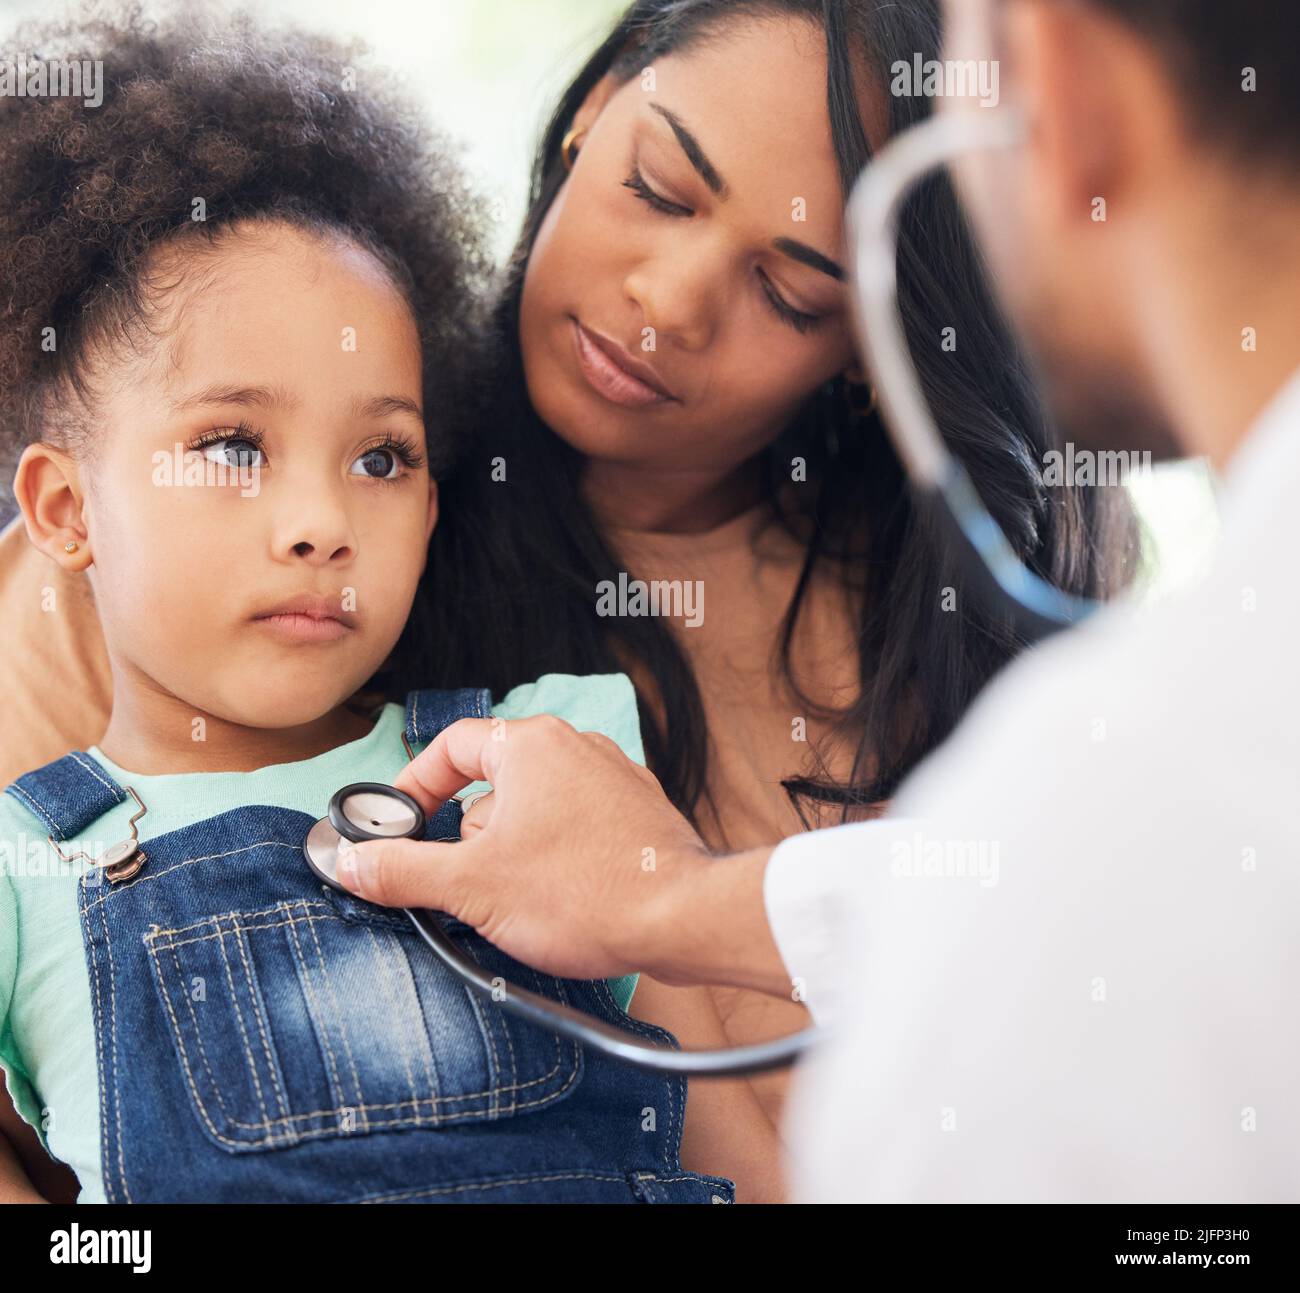 Lets take a look at your health. Shot of a little girl sitting on her mothers lap while being examined by her doctor. Stock Photo